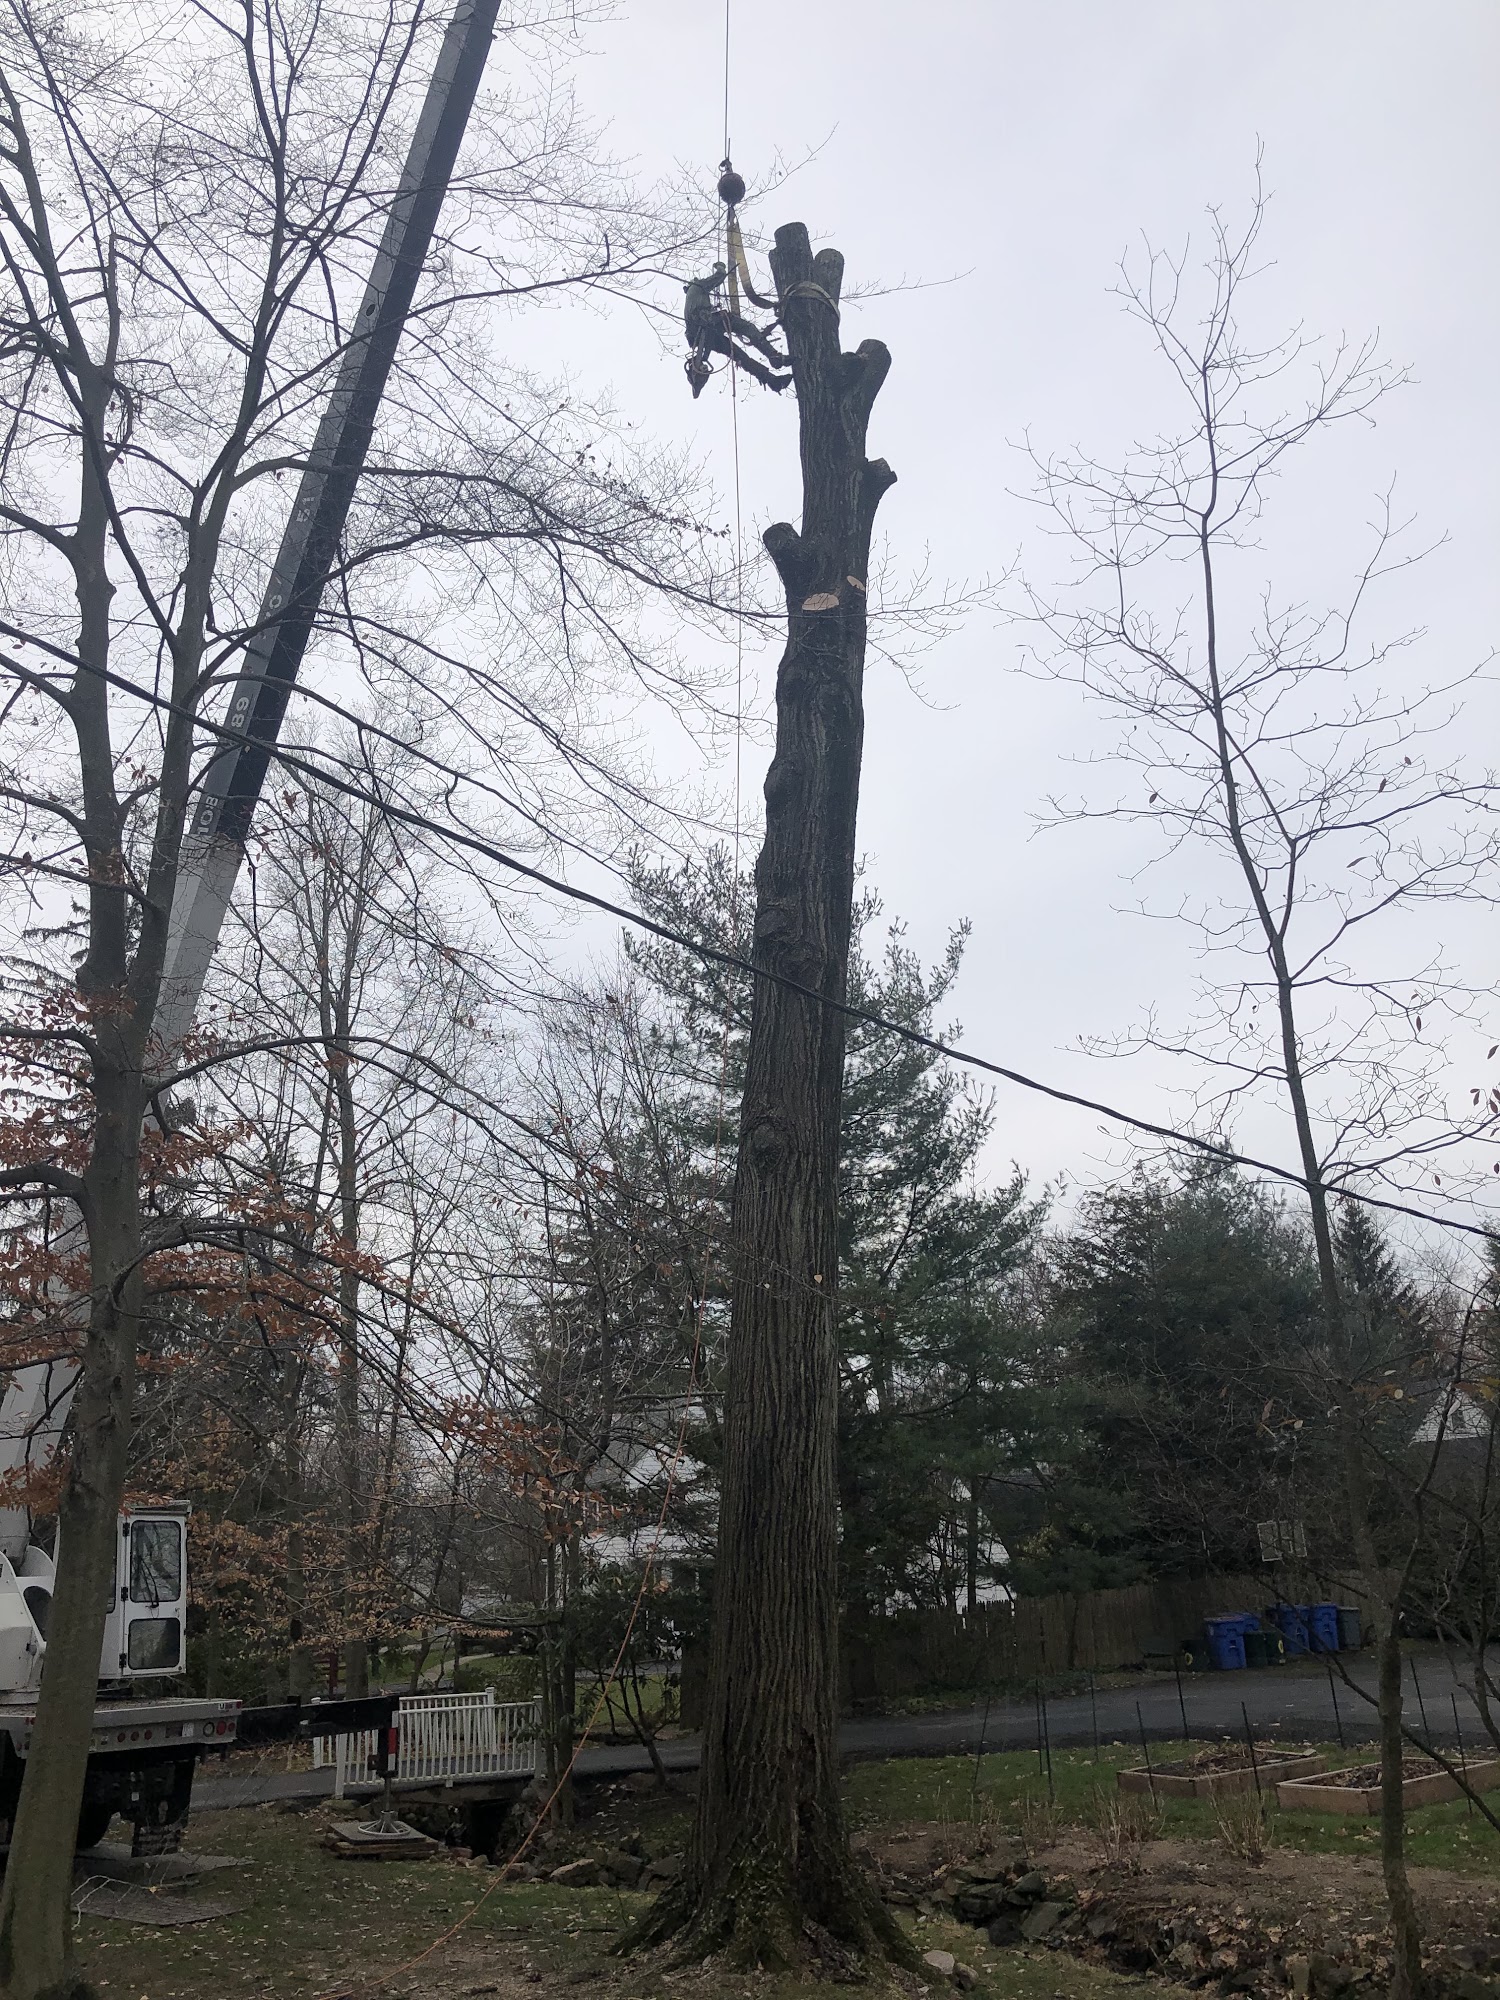 Arrow Tree Service 188 Old Tappan Rd, Old Tappan New Jersey 07675